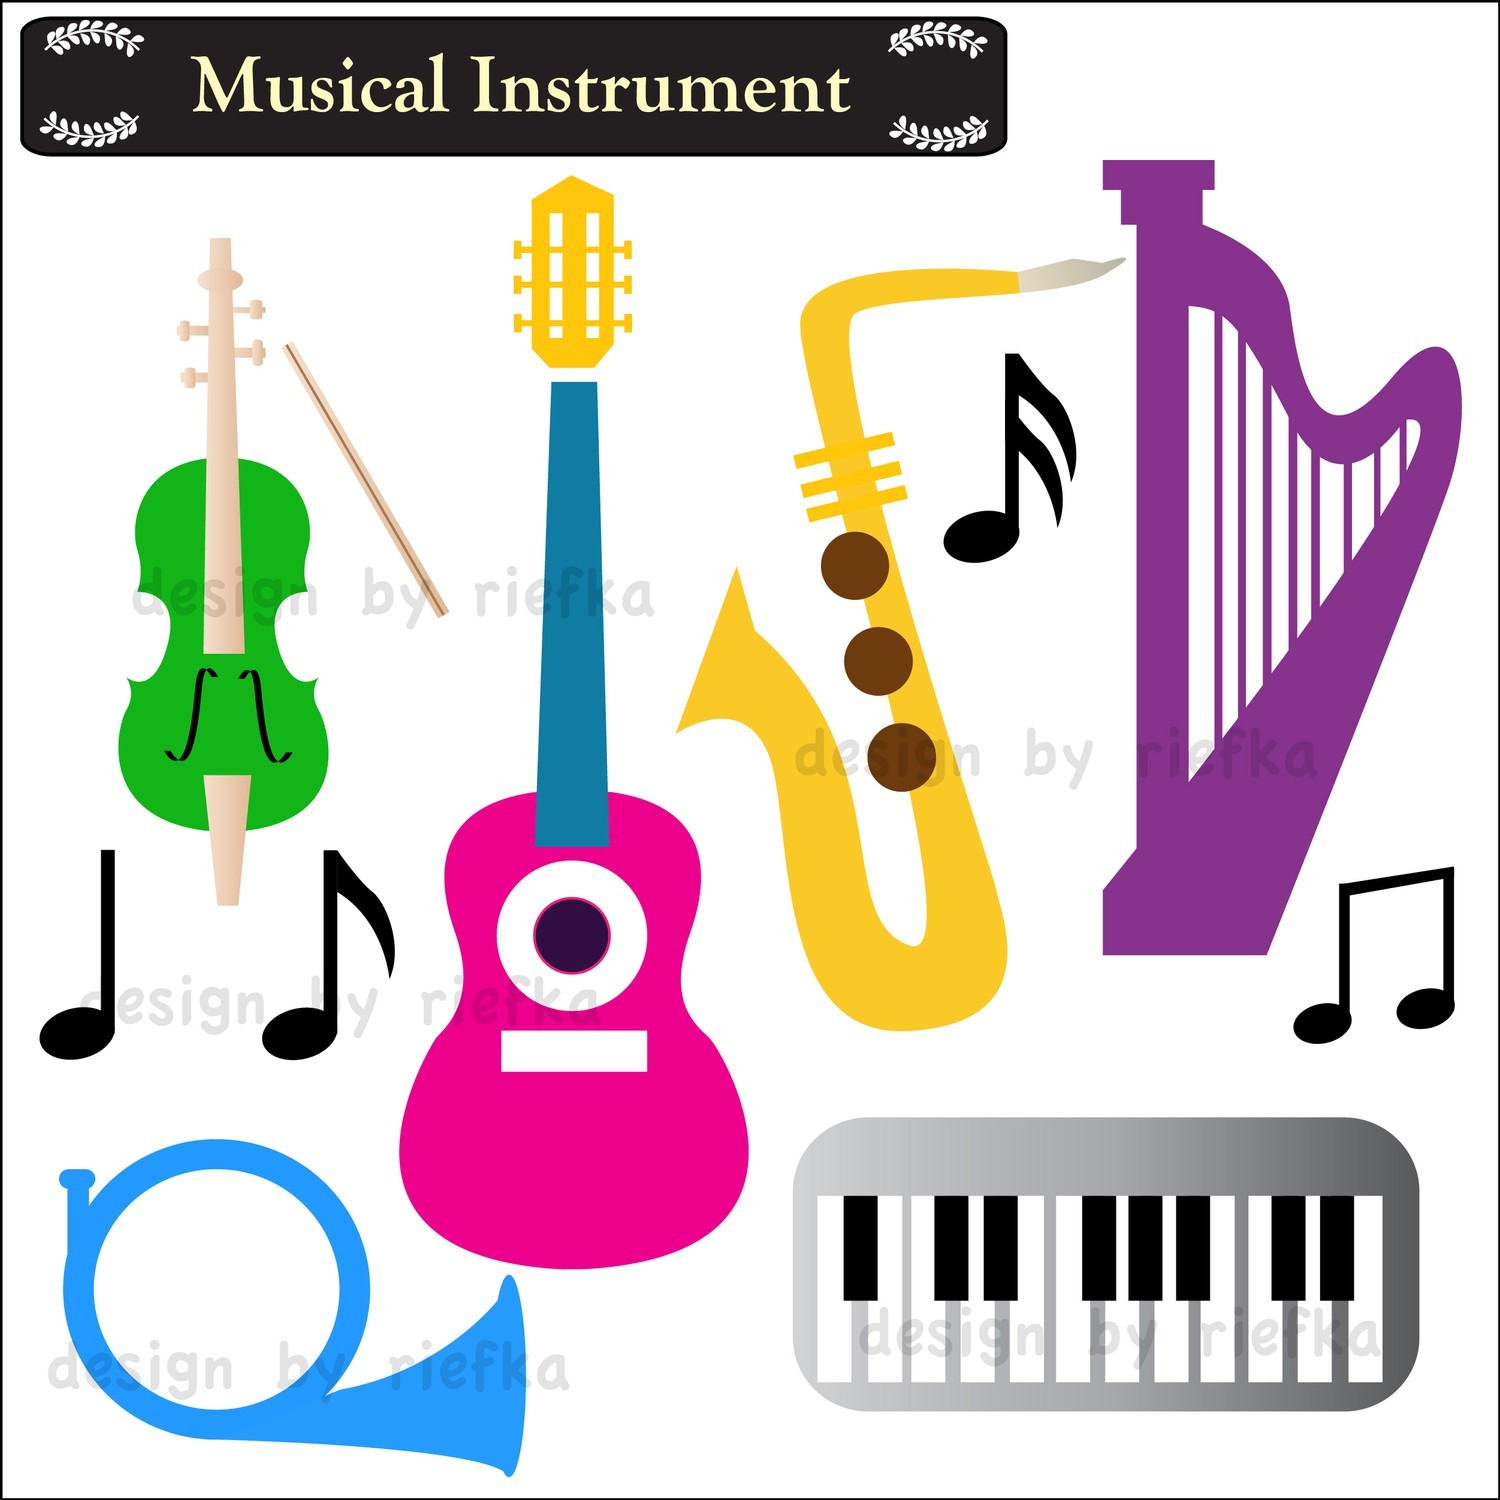 Download the musical instrume